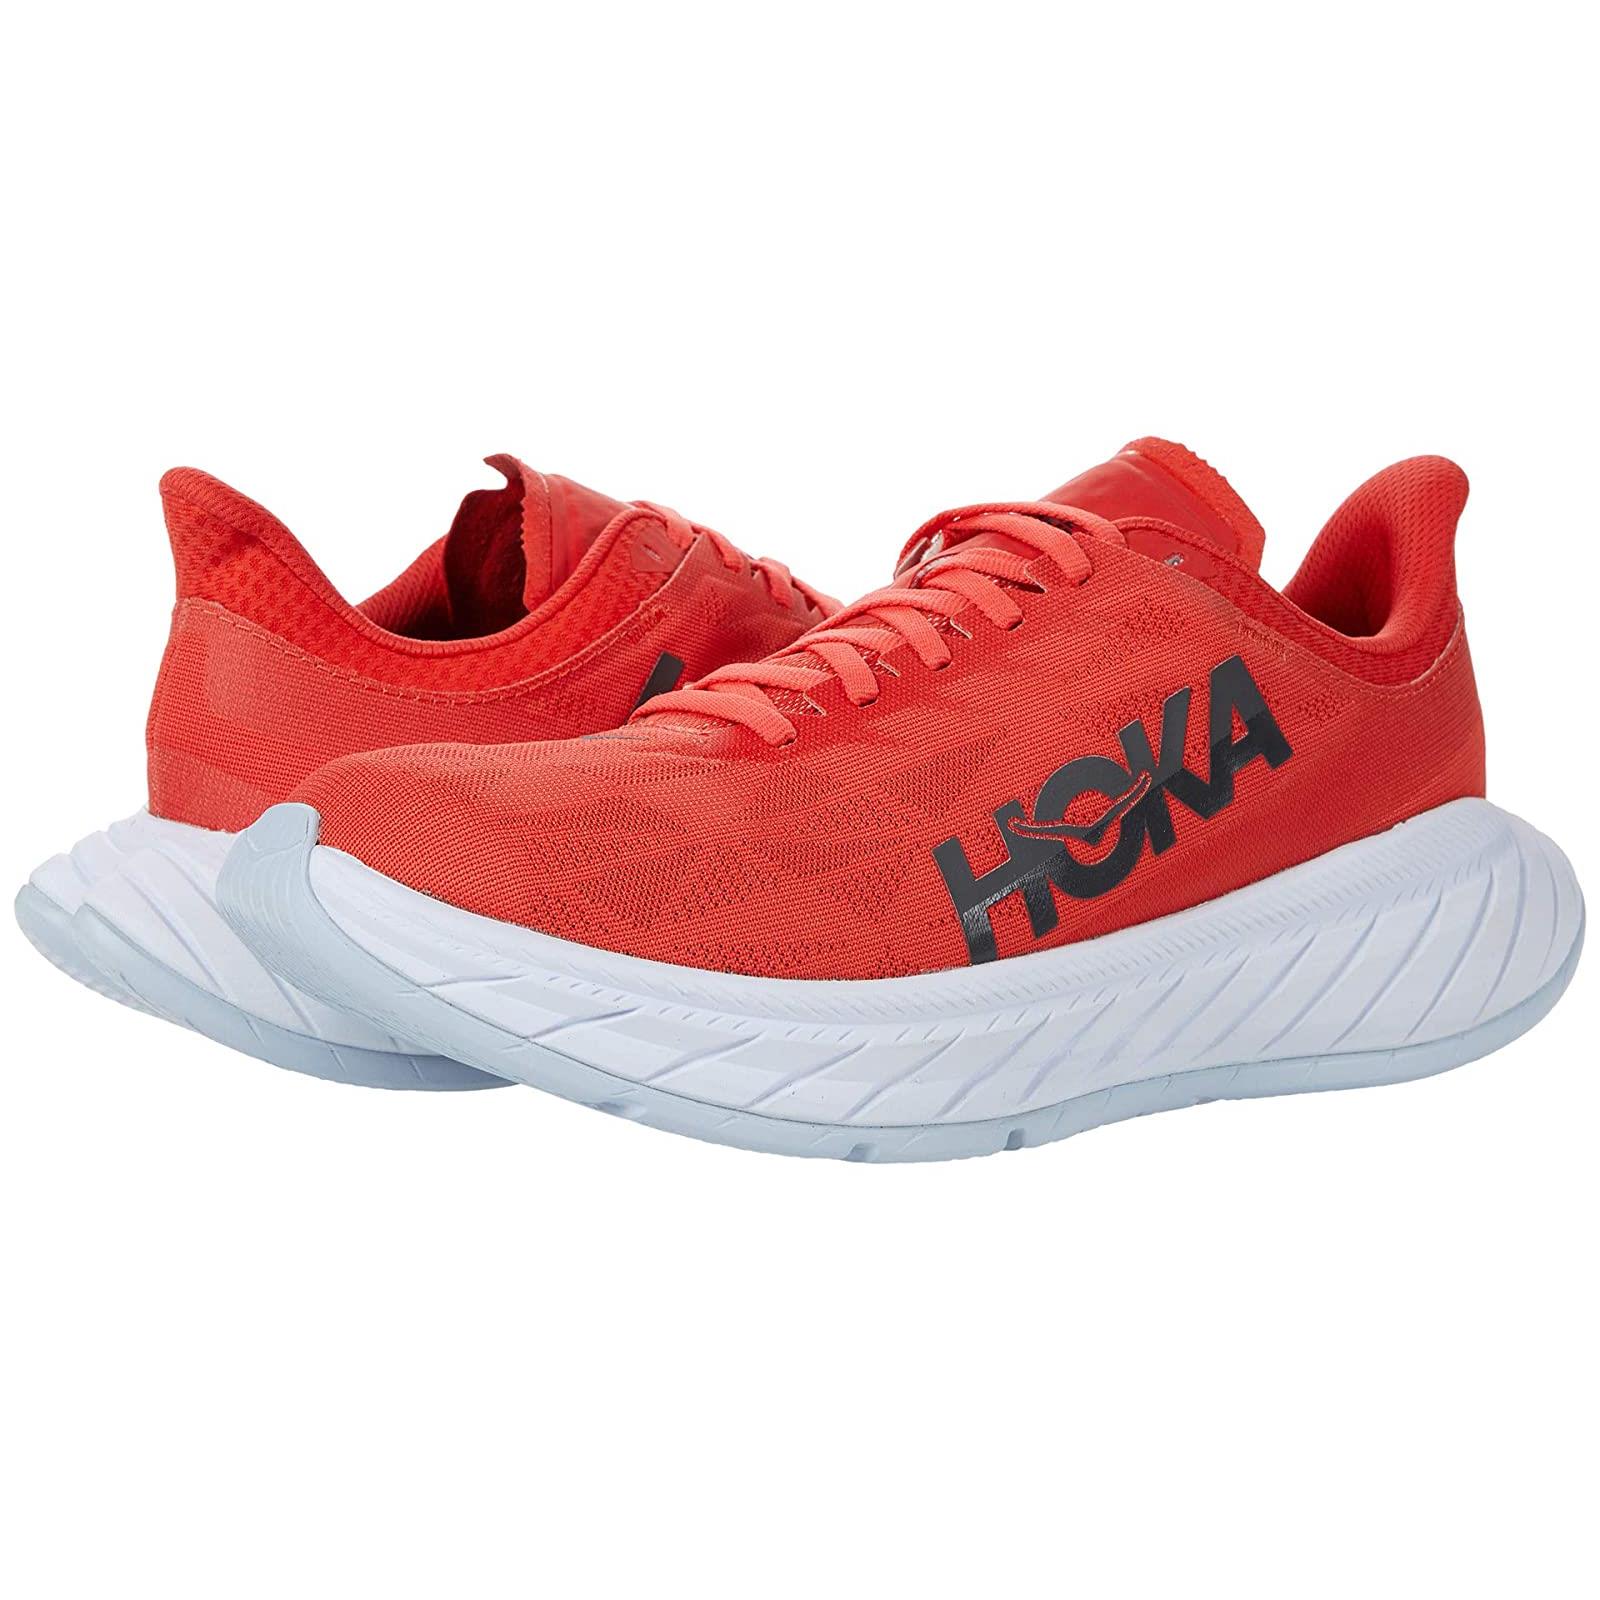 Man`s Sneakers Athletic Shoes Hoka One One Carbon X 2 Fiesta/White